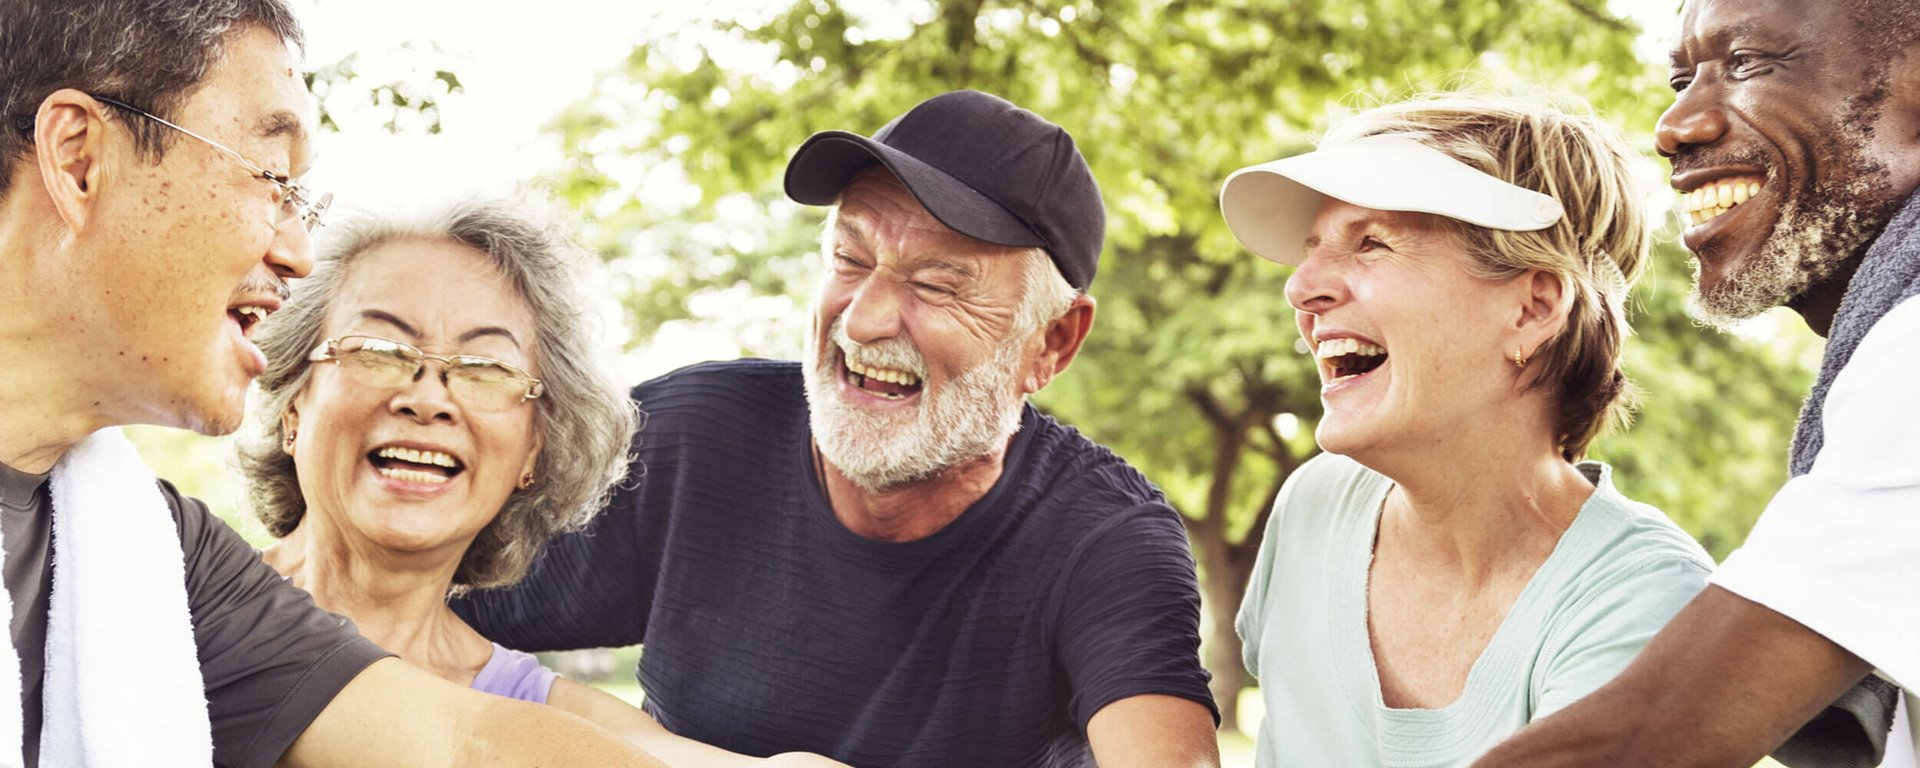 Laughing group of elderly people coming together in park